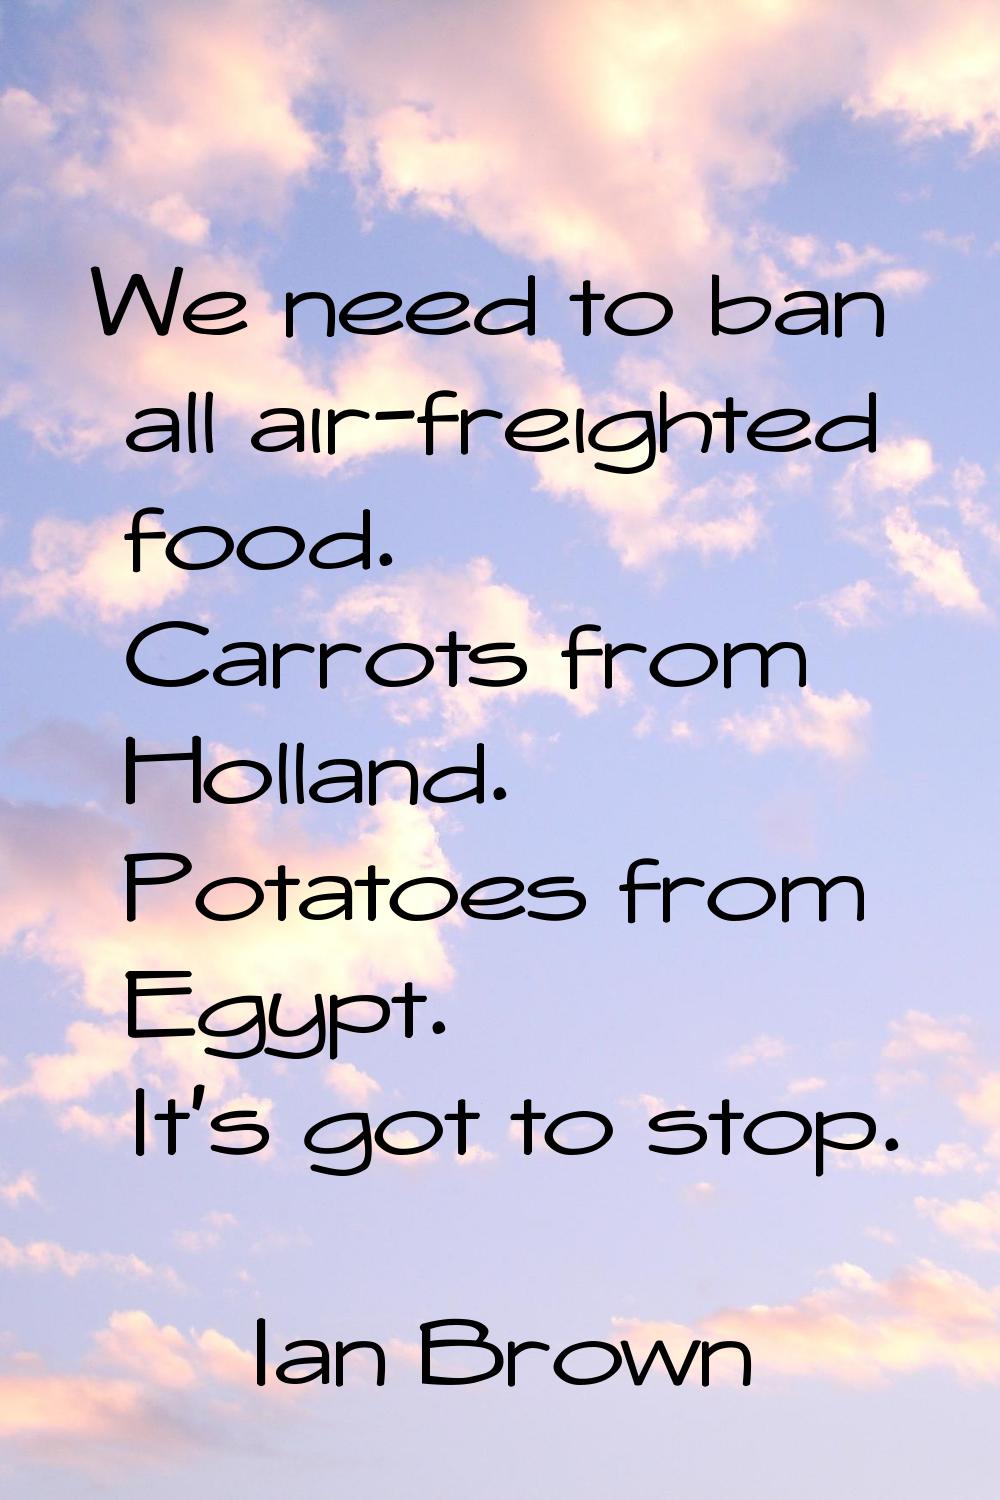 We need to ban all air-freighted food. Carrots from Holland. Potatoes from Egypt. It's got to stop.